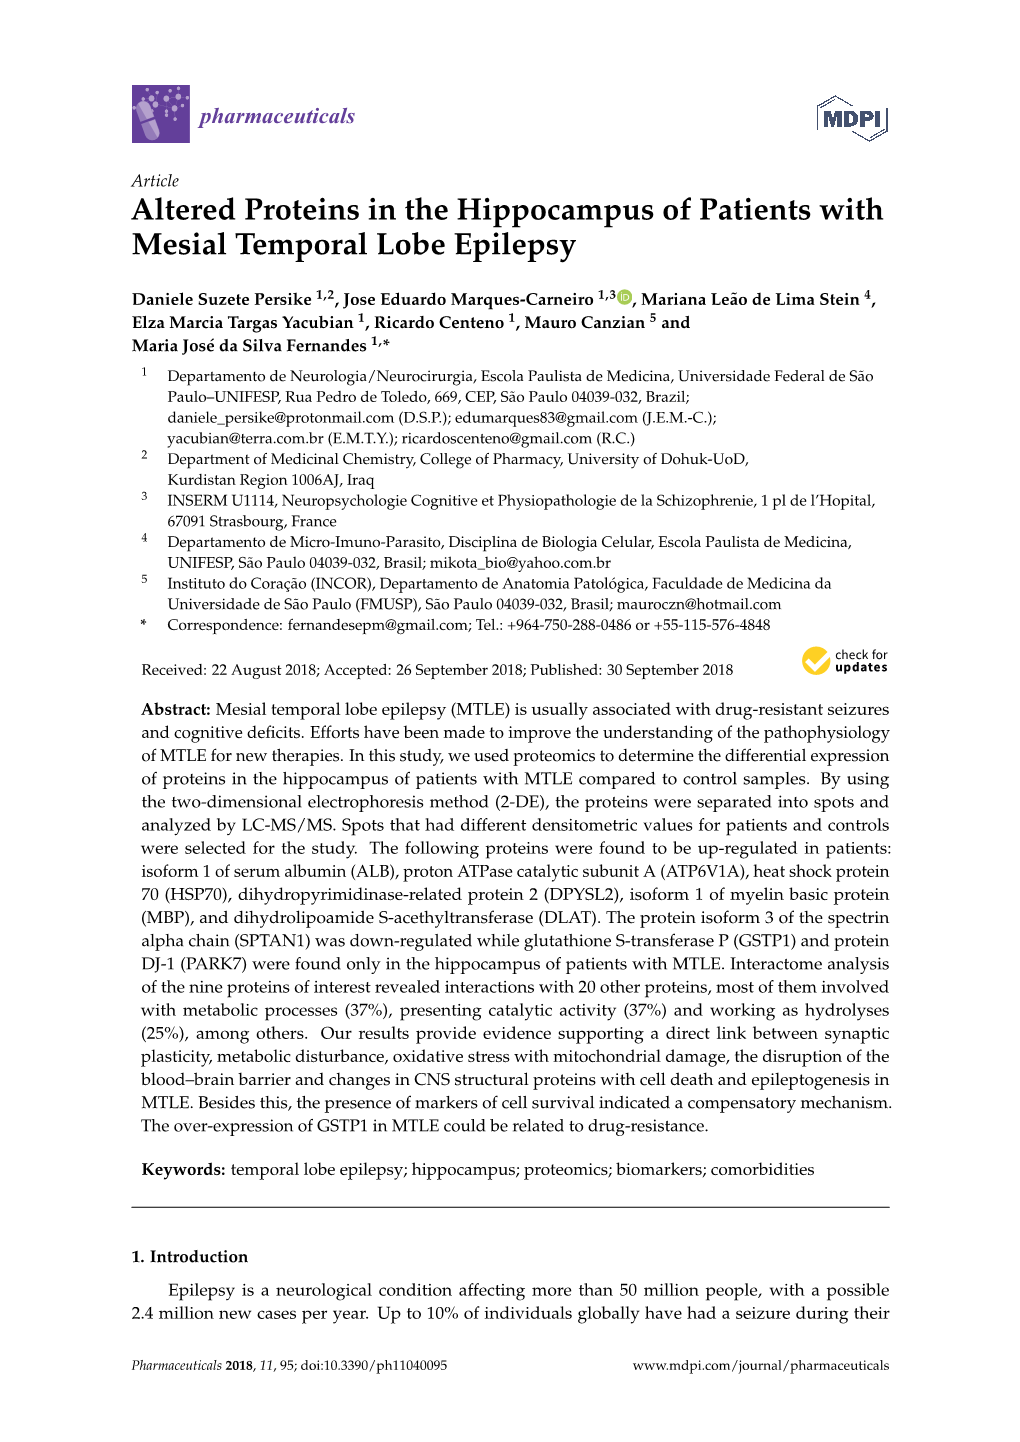 Altered Proteins in the Hippocampus of Patients with Mesial Temporal Lobe Epilepsy